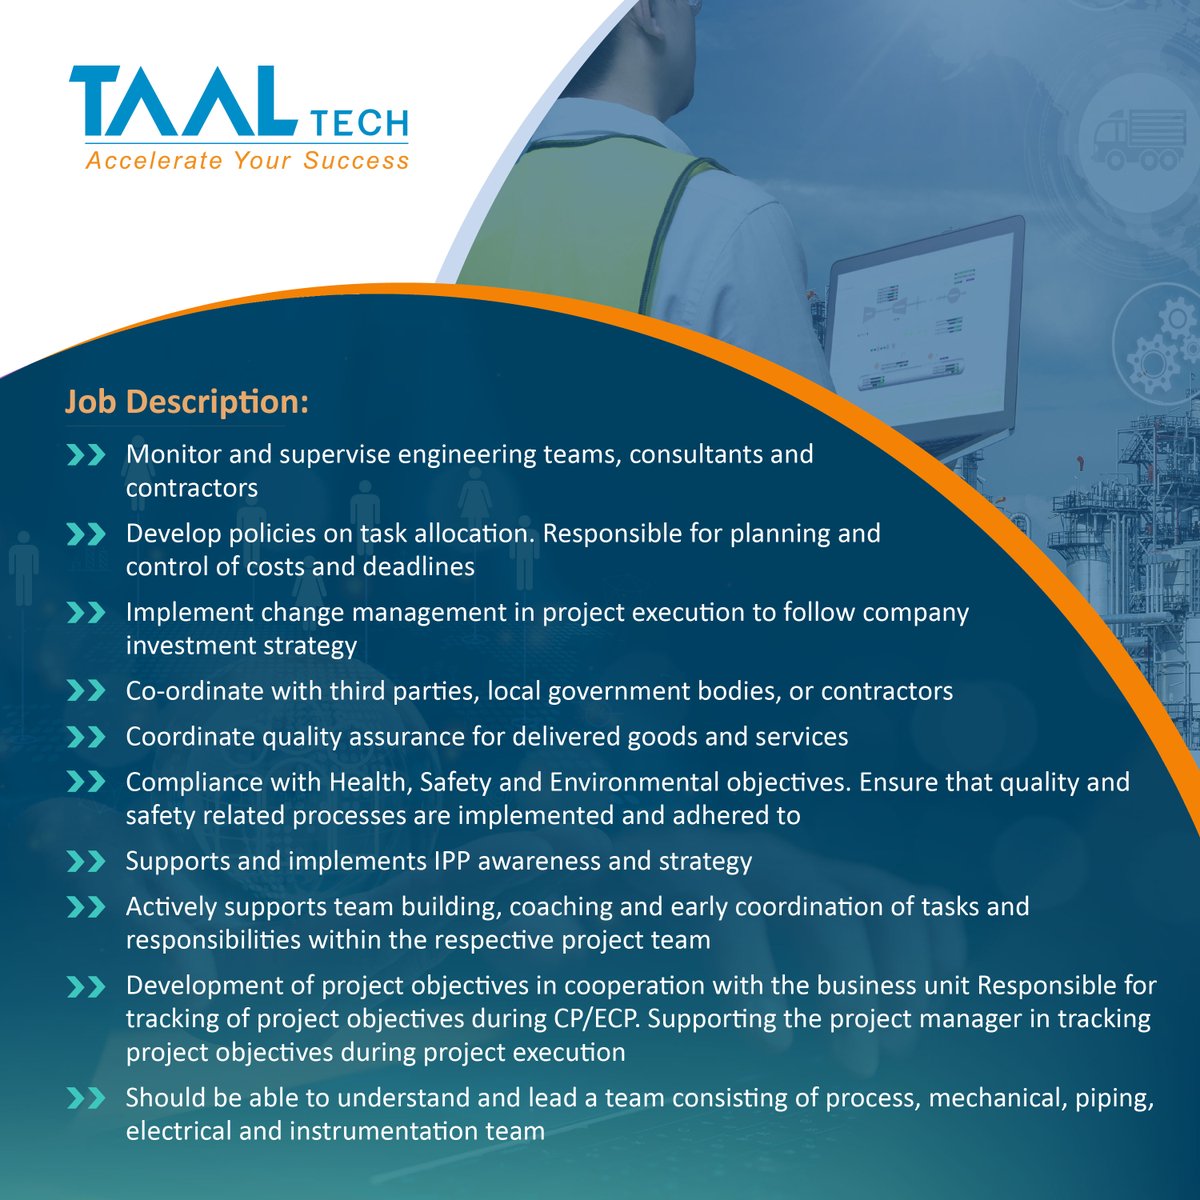 TAAL Tech is looking for project manager-design engineering.
#chemicalengineering #mechanicalengineering 
#engineeringservices #epc #feed #designengineers #oilandgas #oilandgasindustry #petrochemical #power #petrochemicalindustry #taaltech #taaltechies #taaltechnews #taaltechjobs